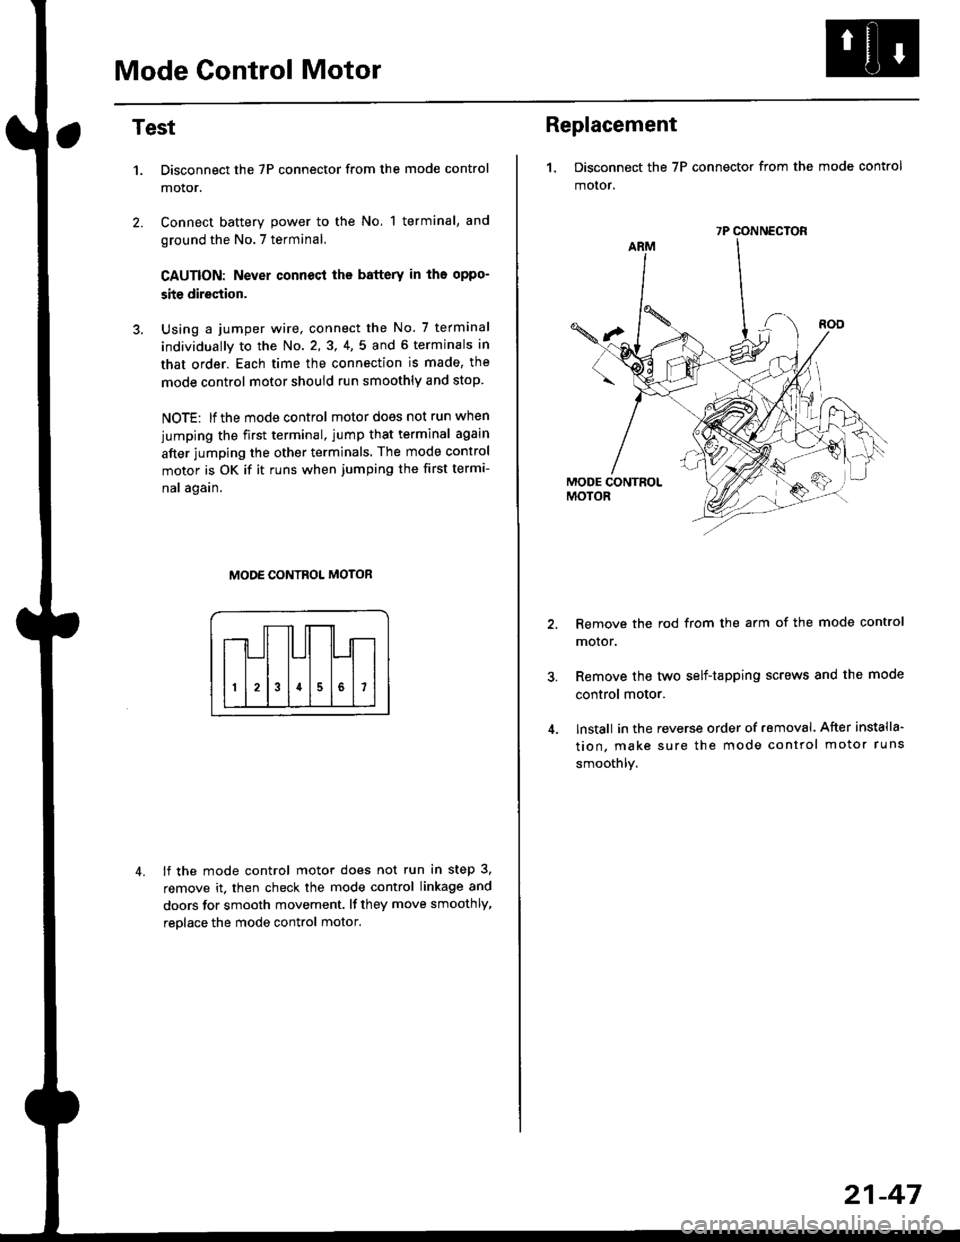 HONDA CIVIC 1998 6.G Workshop Manual Mode Control Motor
2.
Test
1.
4.
Disconnect the 7P connector from the mode control
motor.
Connect battery power to the No, 1 terminal, and
ground the No.7 terminal,
CAUTION: Never connecl the battery 